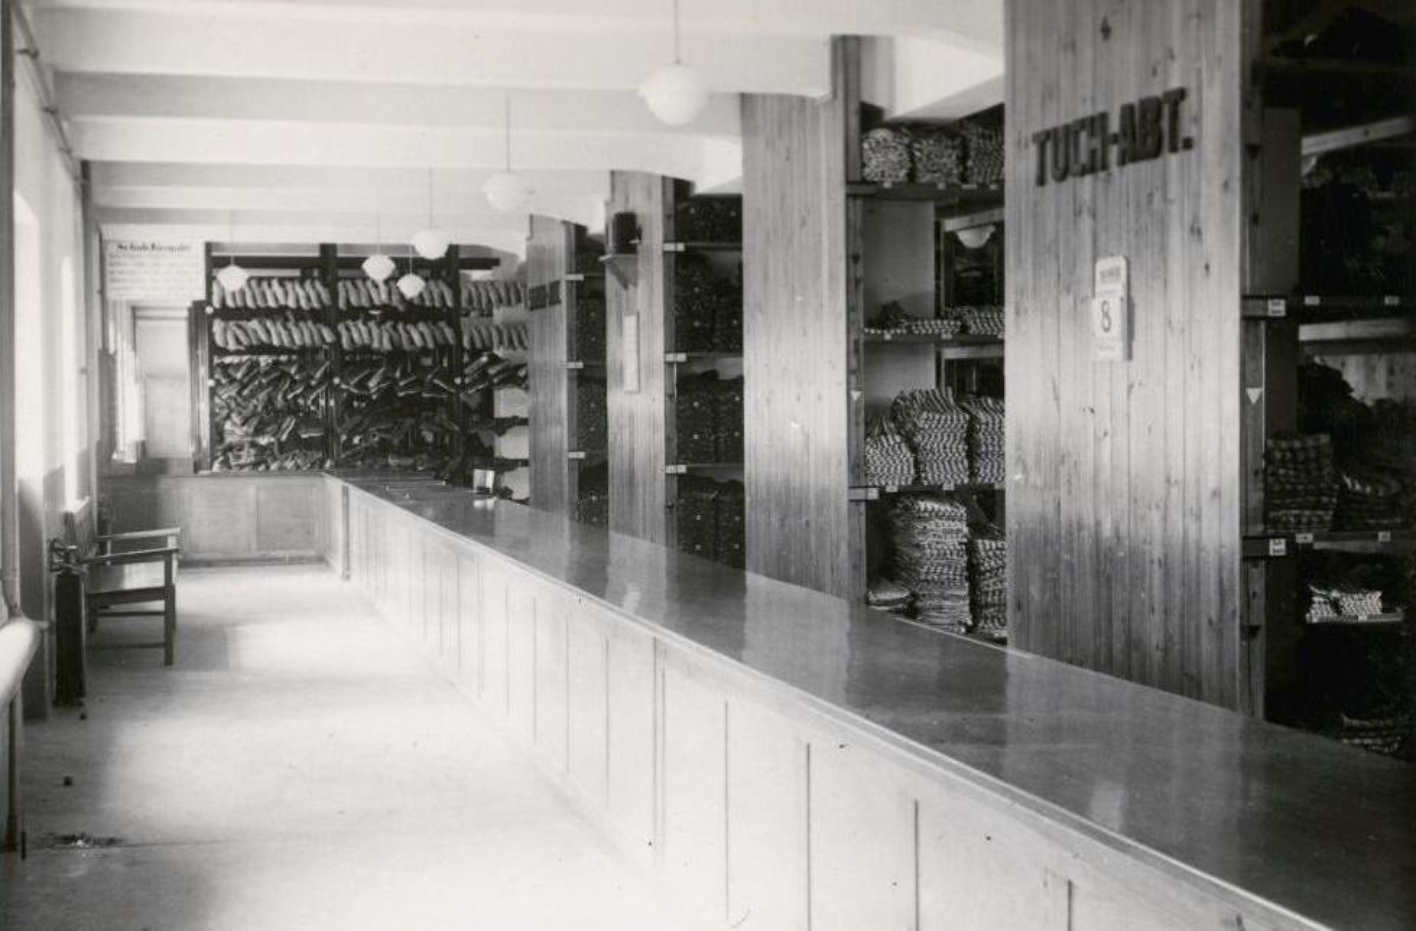 The picture shows a longer room divided into two areas by a long counter. On the right you can see a corridor and windows on the wall. On the left behind the counter, four large shelves can be seen, which are stocked with clothes and hangers. At the very back of the room, a shelf with wooden shoes can be seen.